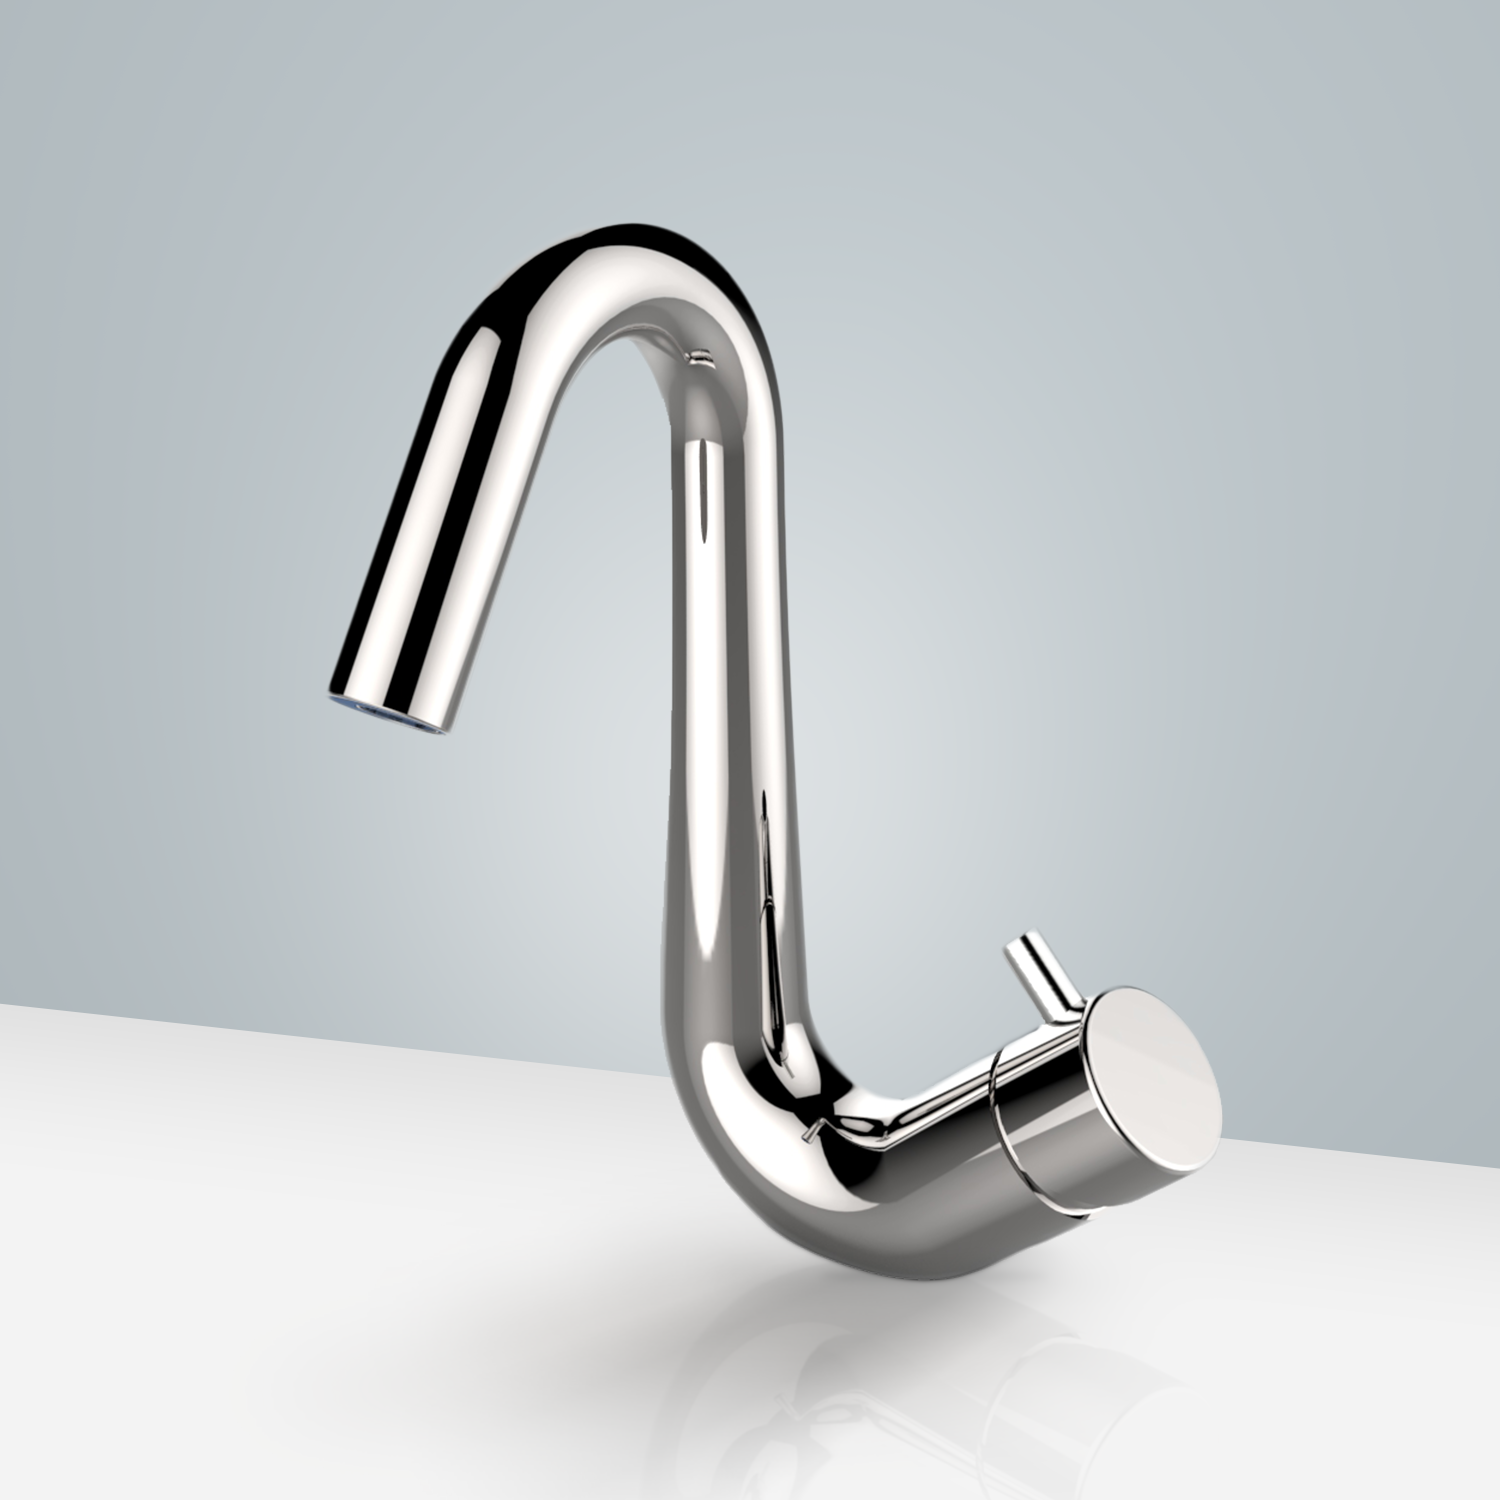 Fontana Napoli Commercial Touchless Bathroom And Manual Temperature Control Faucet